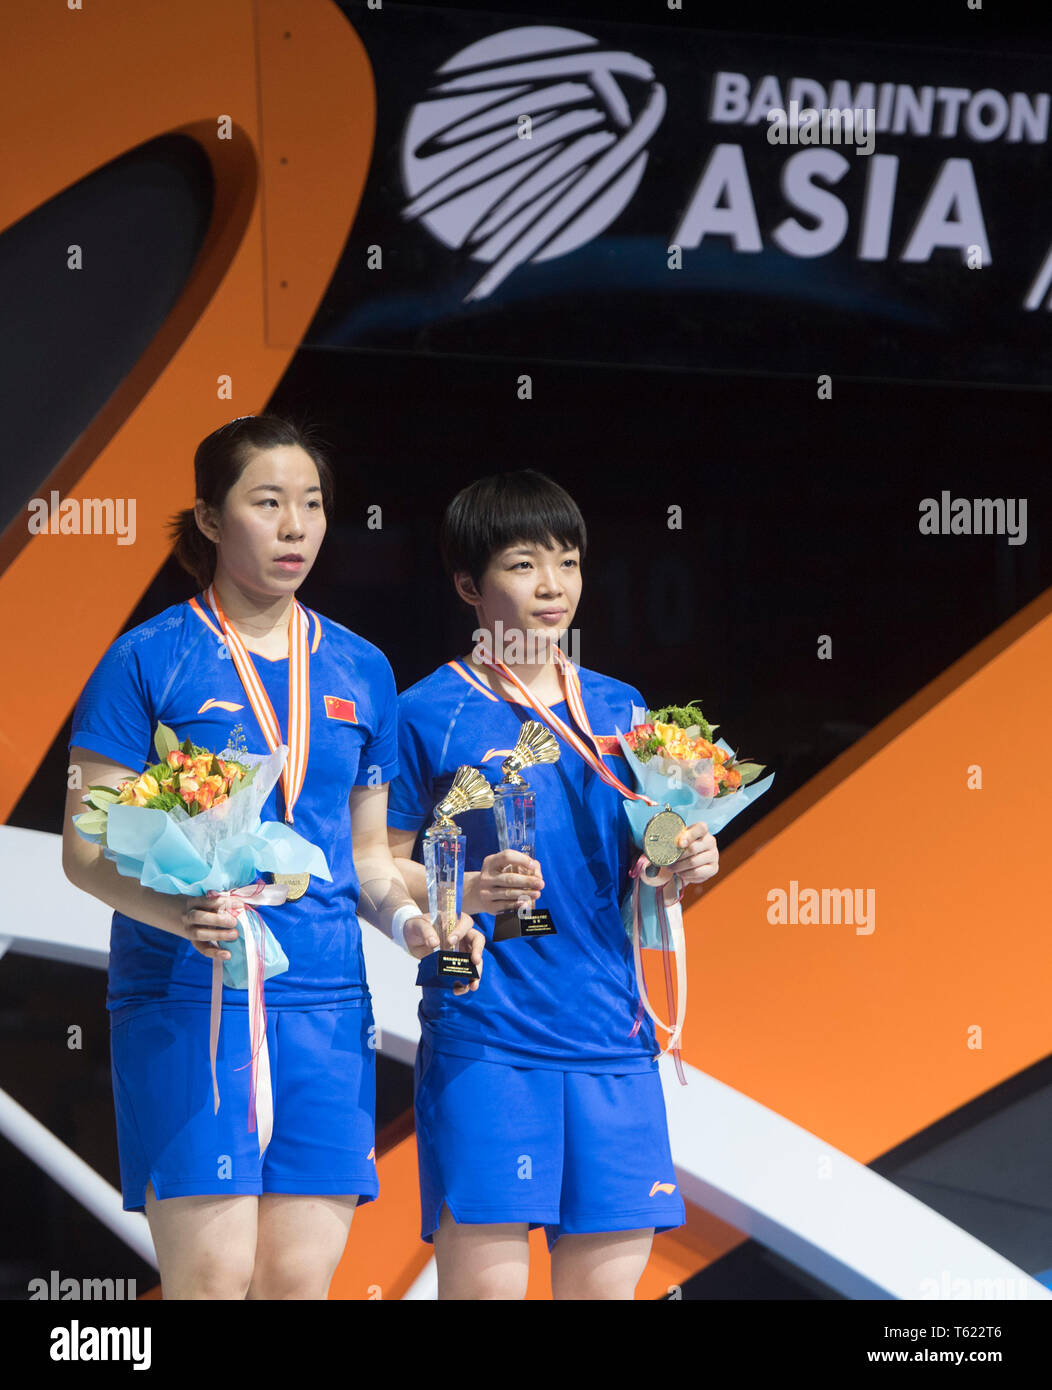 Wuhan China 28th Apr 2019 Chen Qingchen R Jia Yifan Of China Pose During The Awarding Cerenomy For The Women S Doubles Event At Bwf Badminton Asia Championships 2019 In Wuhan Capital Of Central China